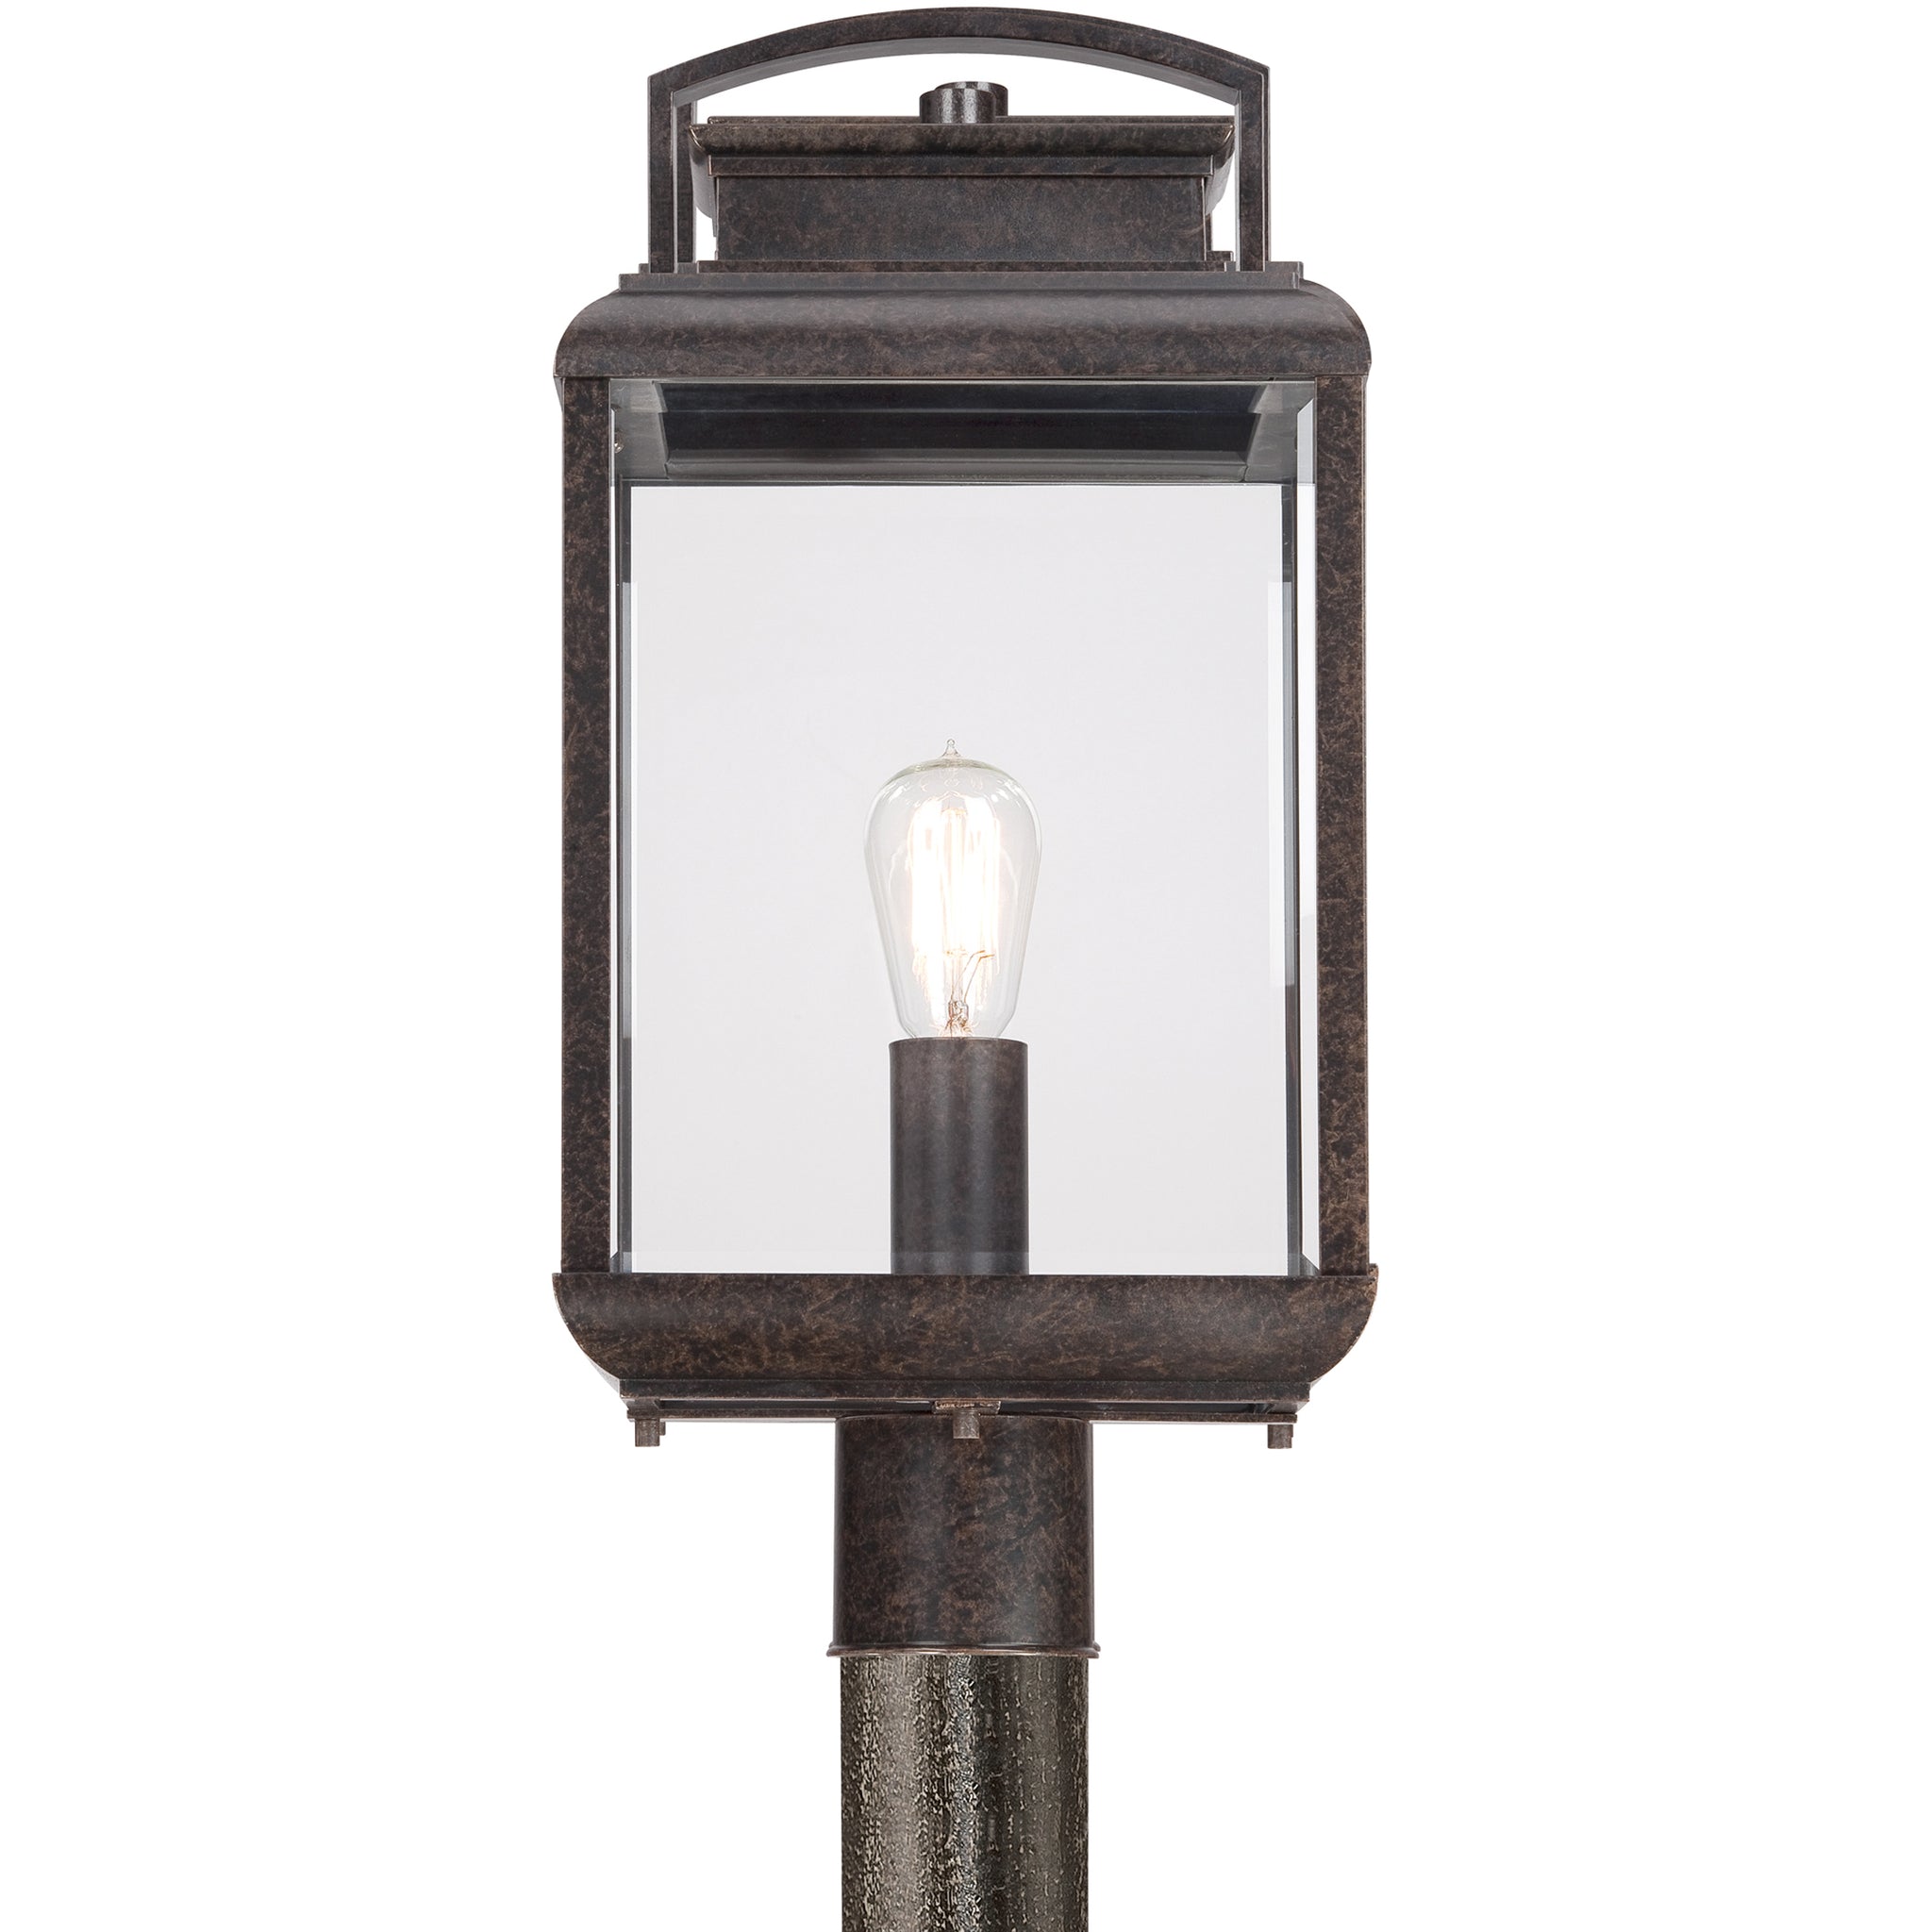 Byron Post Light Imperial Bronze